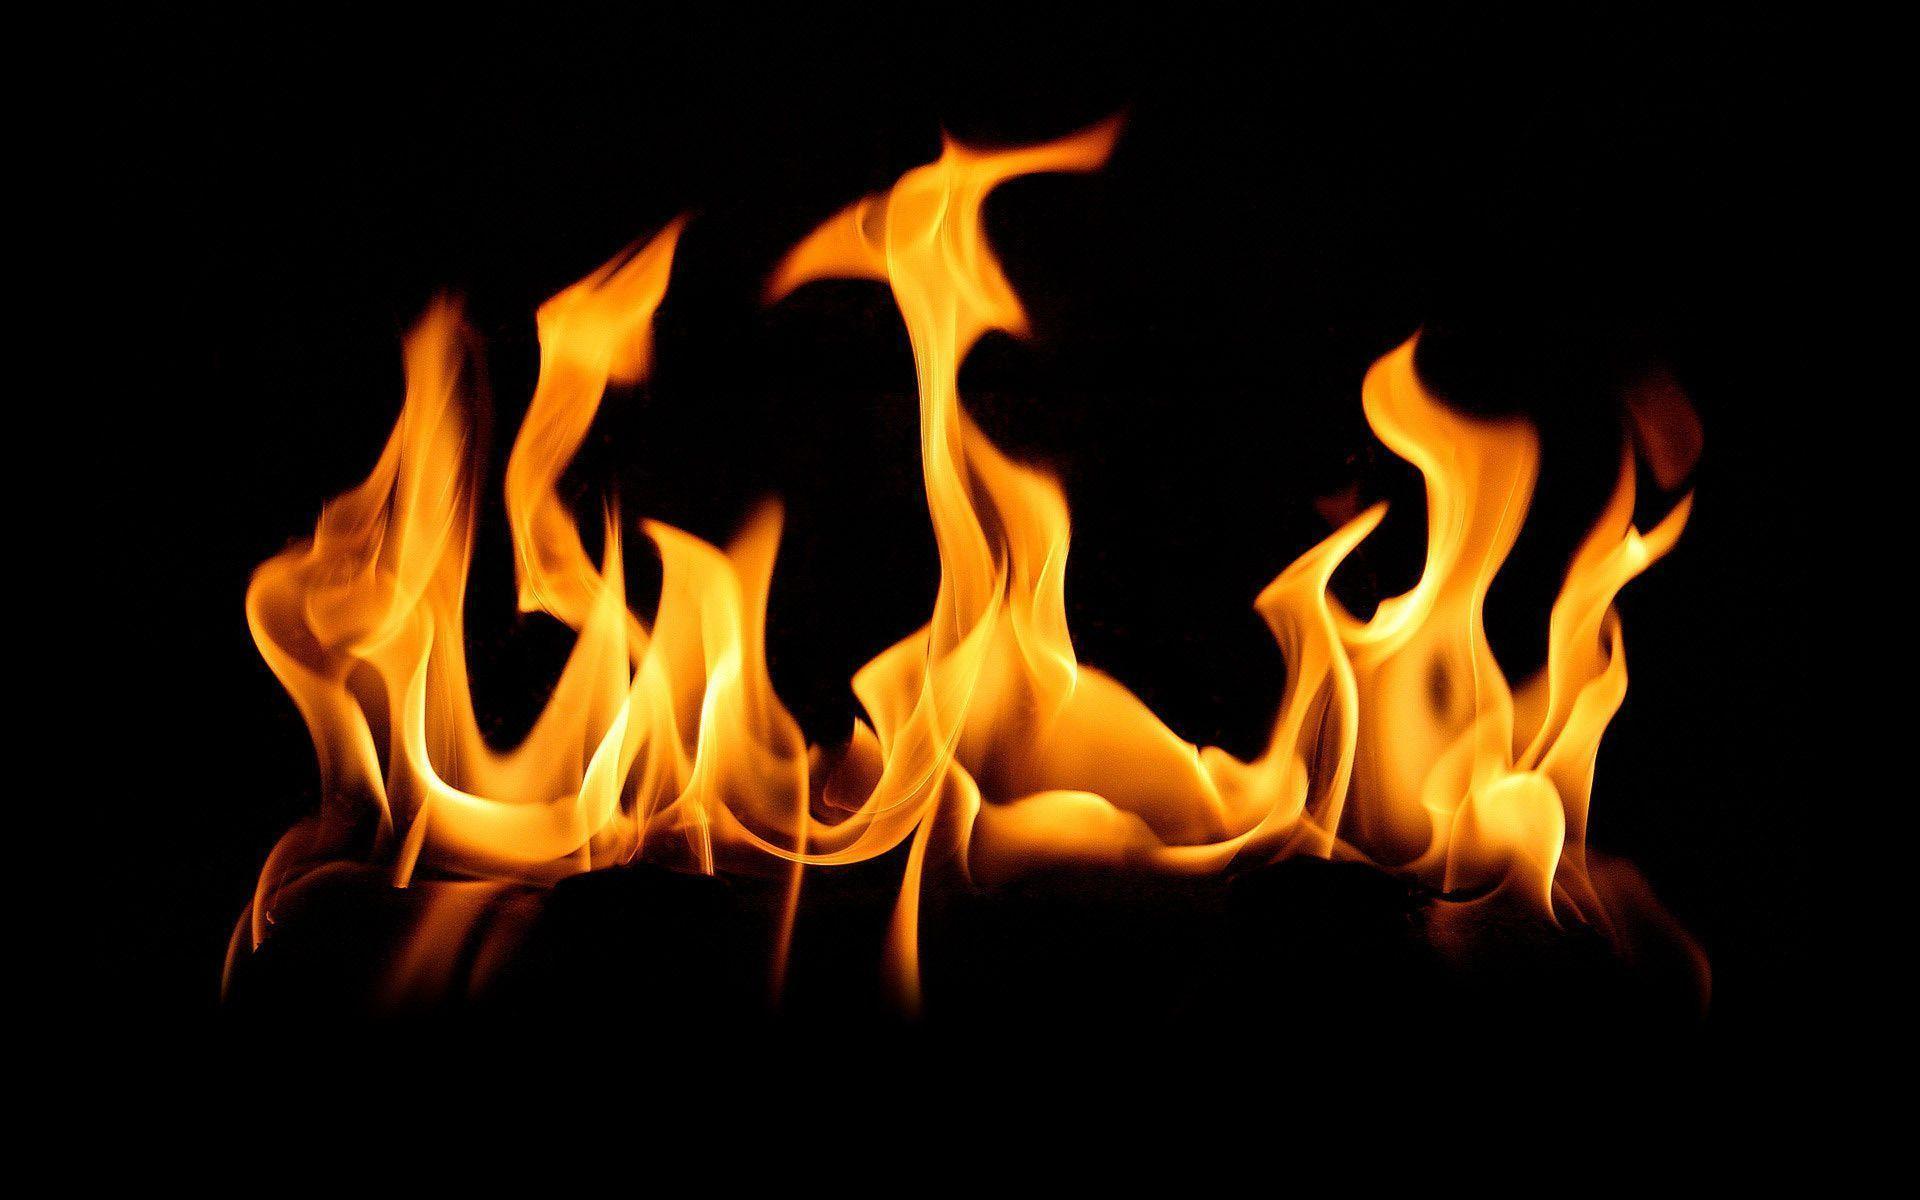 Flames in Fireplace Wallpaper